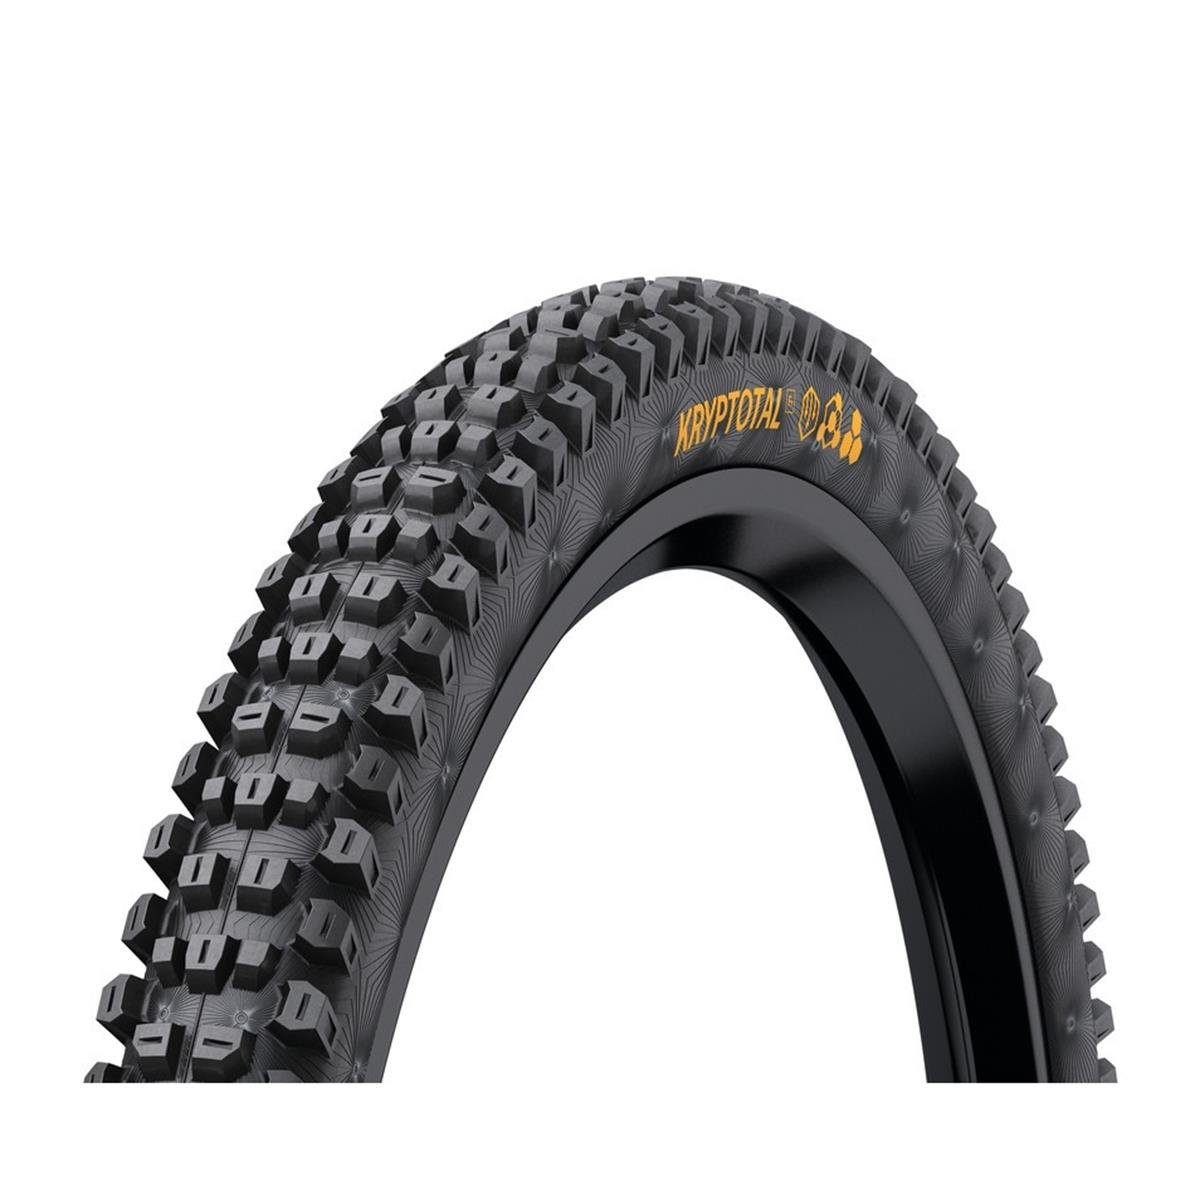 Continental MTB-Reifen Kryptotal Front DH 29 x 2.4 Zoll, DH-Casing, Super Soft-Compound, TR